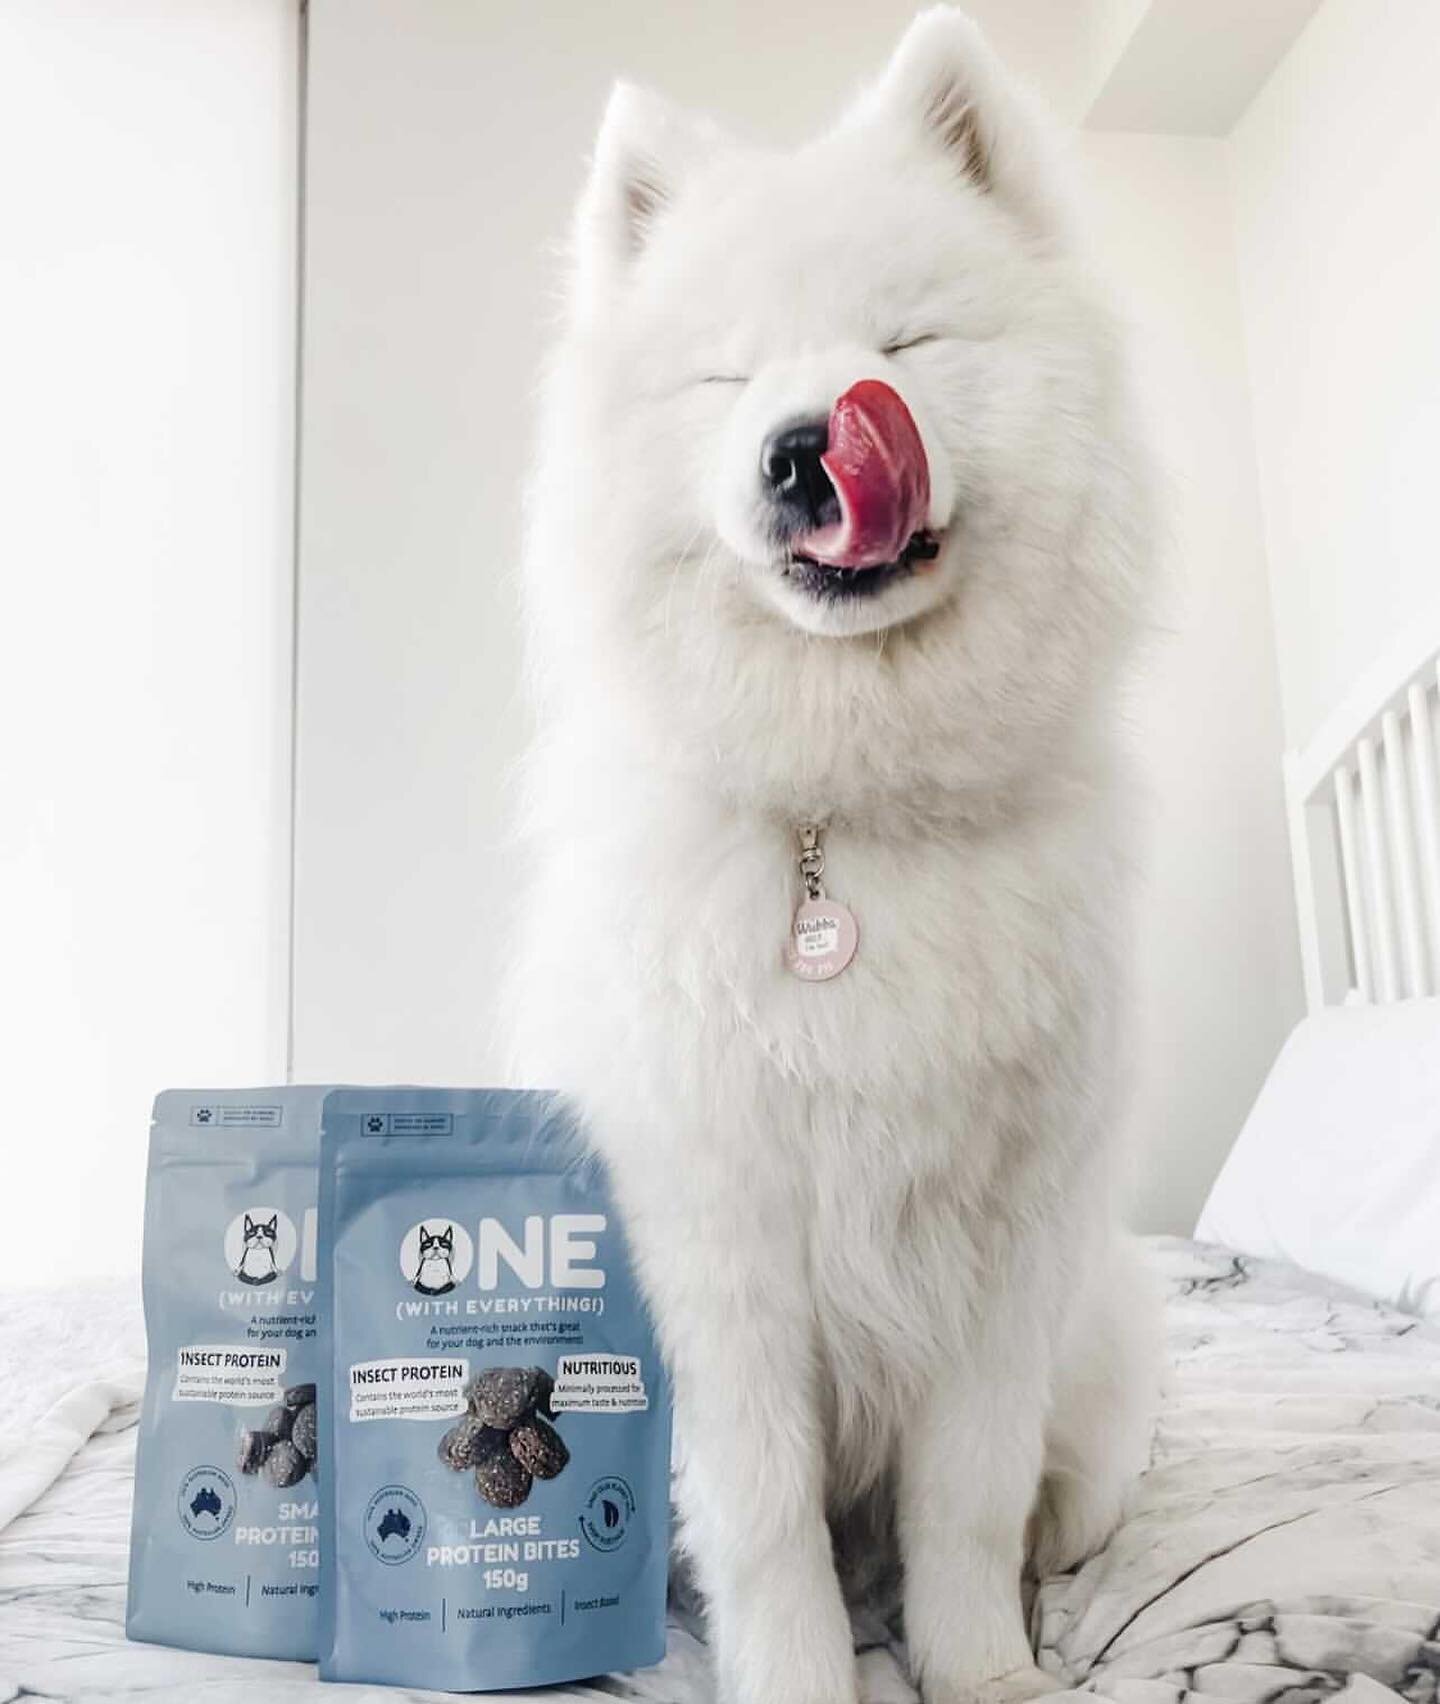 Delicious, Nutritious and Carbon Neutral treats in bed.. does it get any better? 

#onepets #samoyed #wubba #carbonneutral #insectprotein #bsfl #circulareconomy #australianmade #ecodog